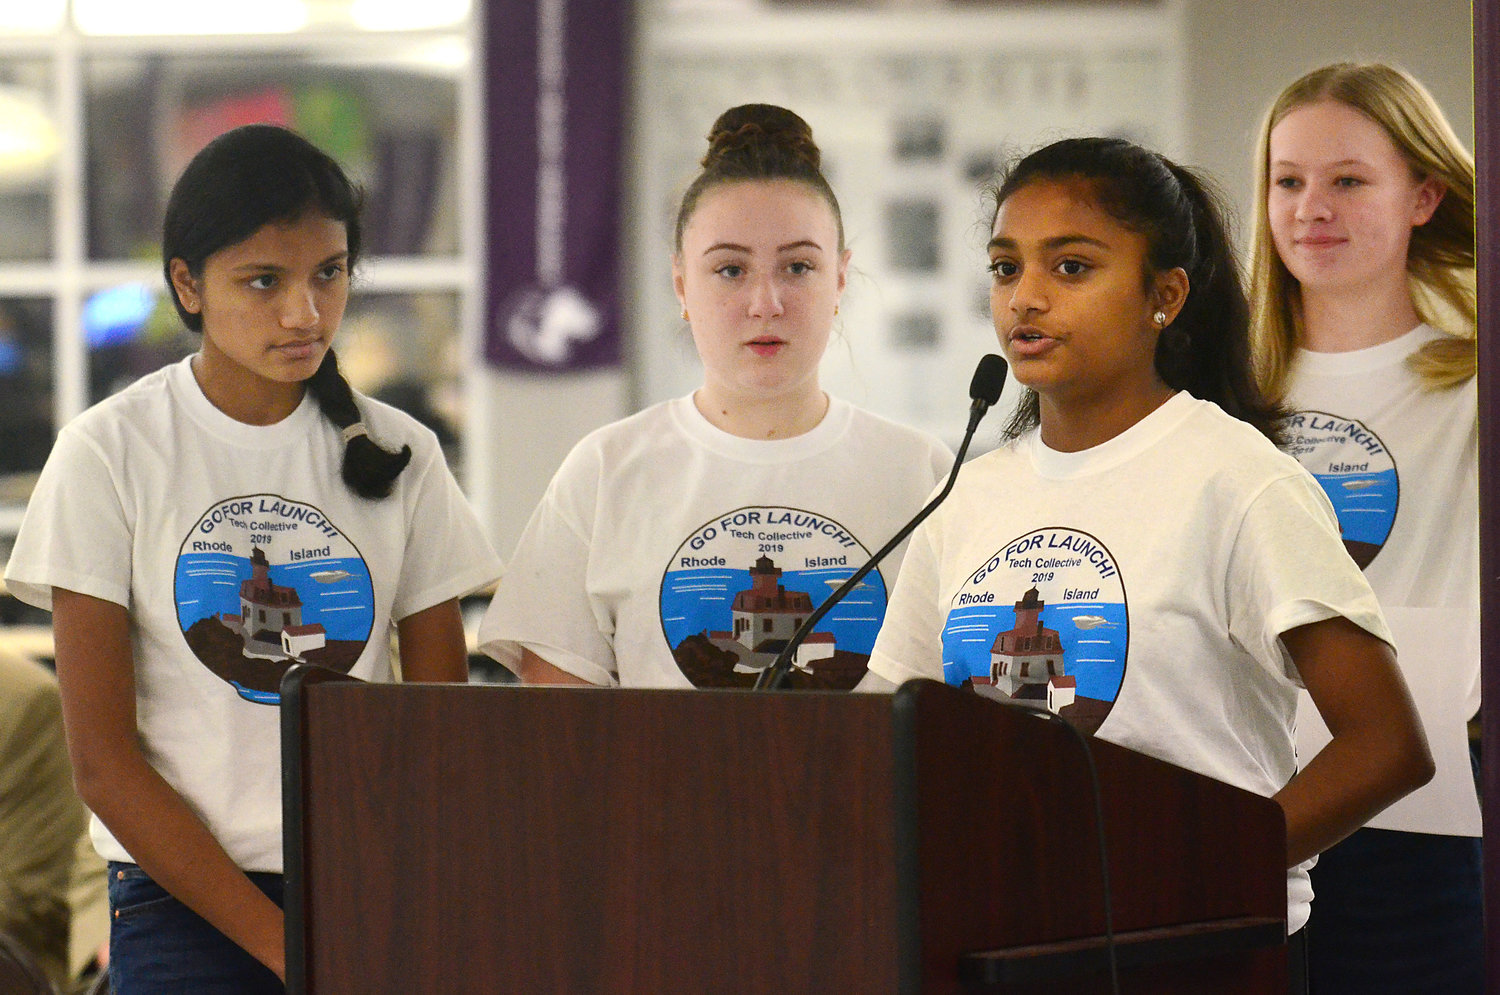 Shivani Mehta speaks about their “Go For Launch” project during the Bristol Warren school committee meeting Tuesday night, with teammates (from left), Aditi Metha, Mykala Hudon and Kristiana Cabral looking on.